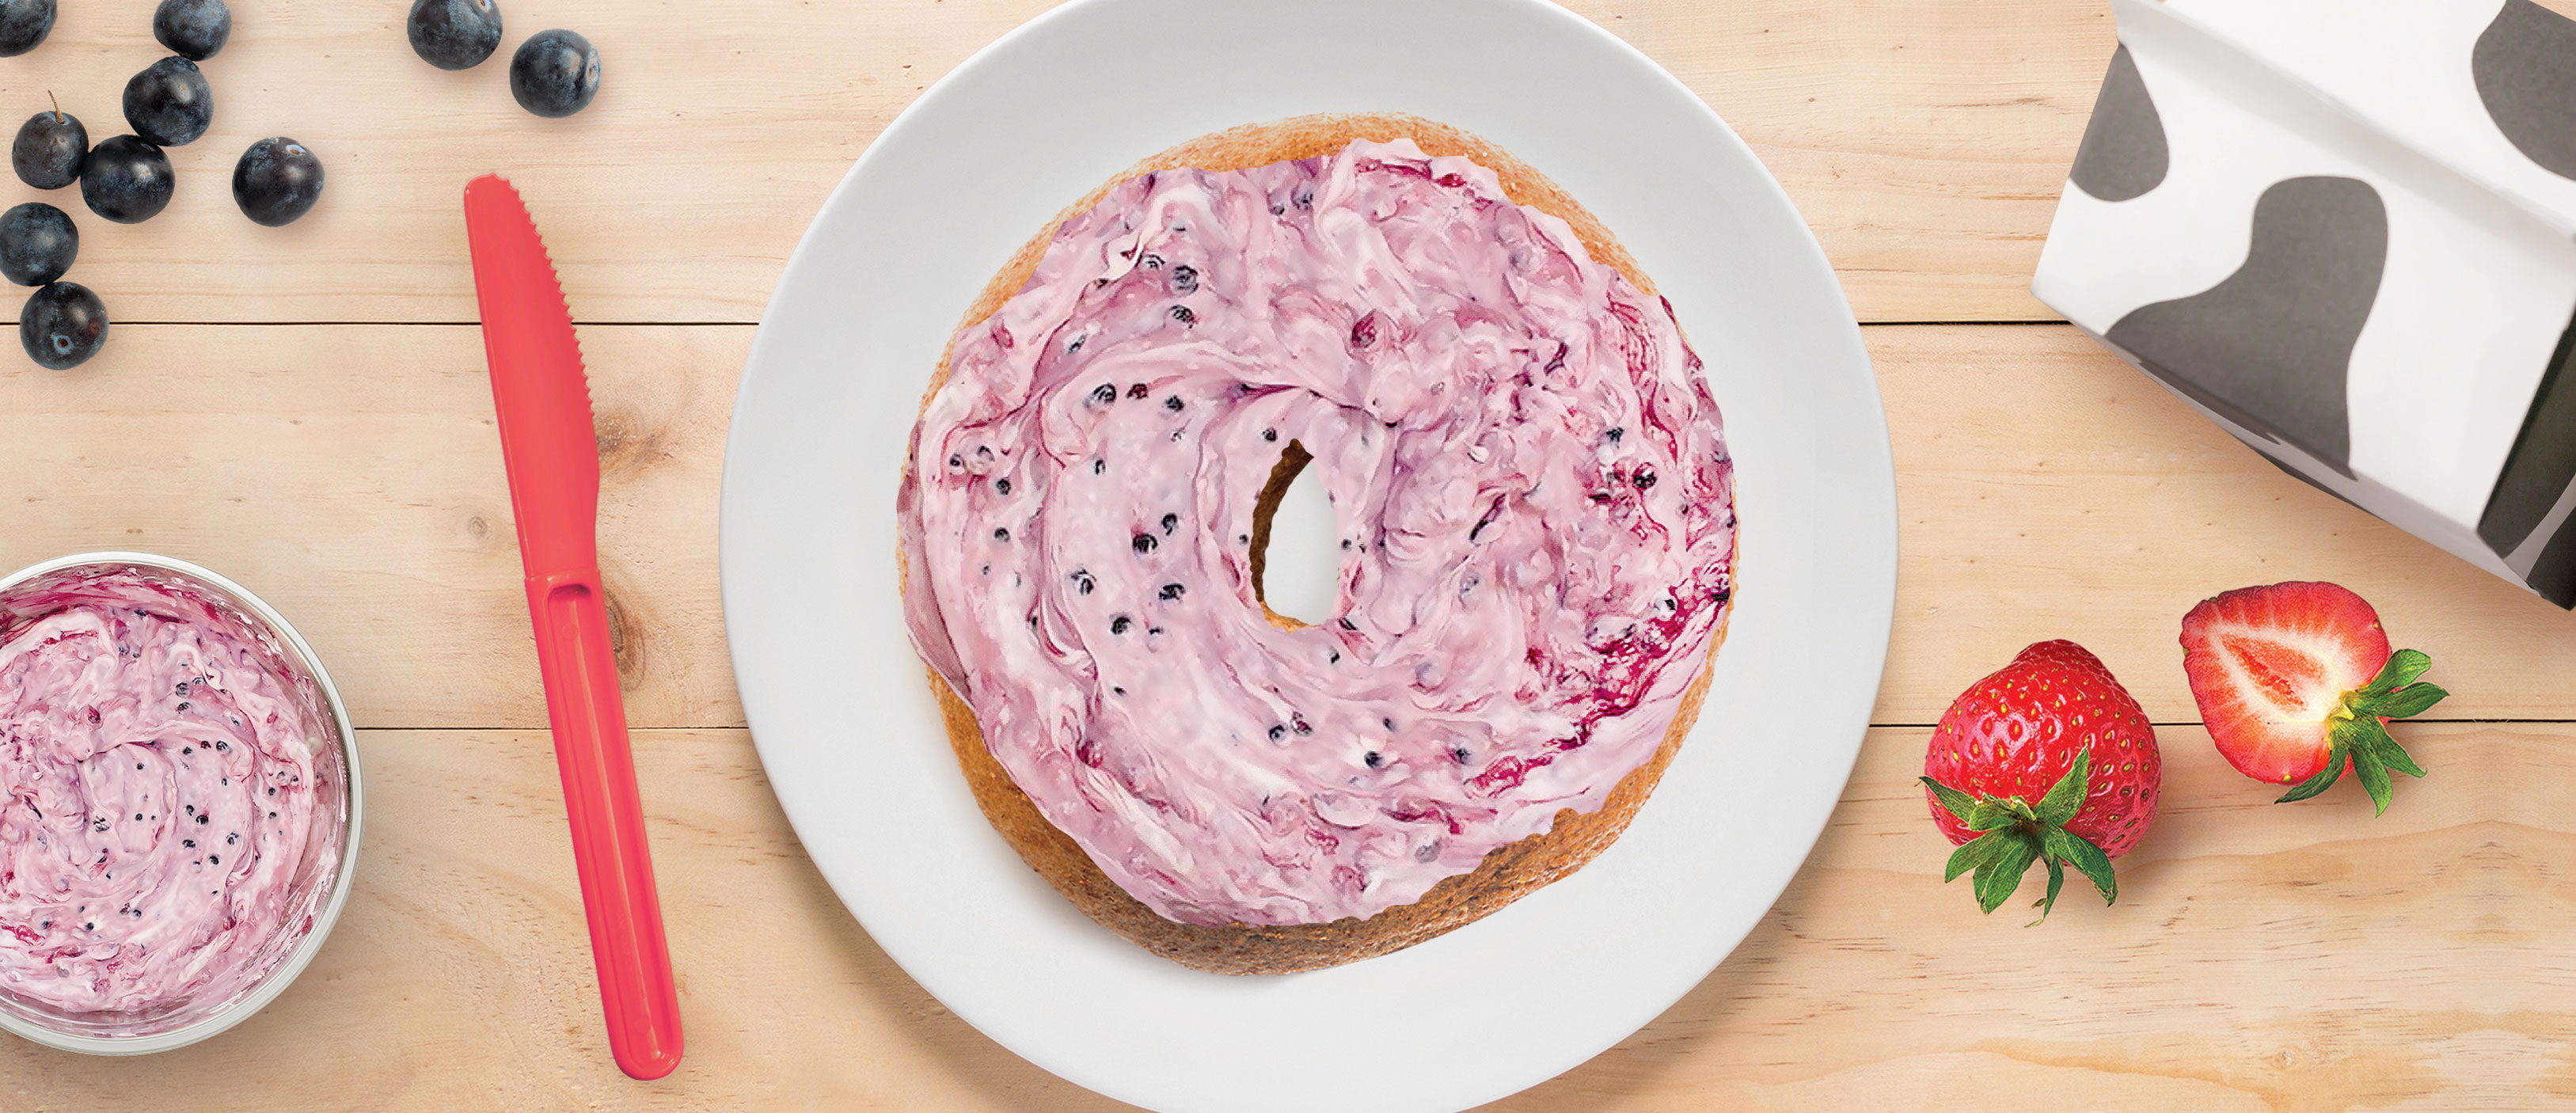 Bagel with berry schmear